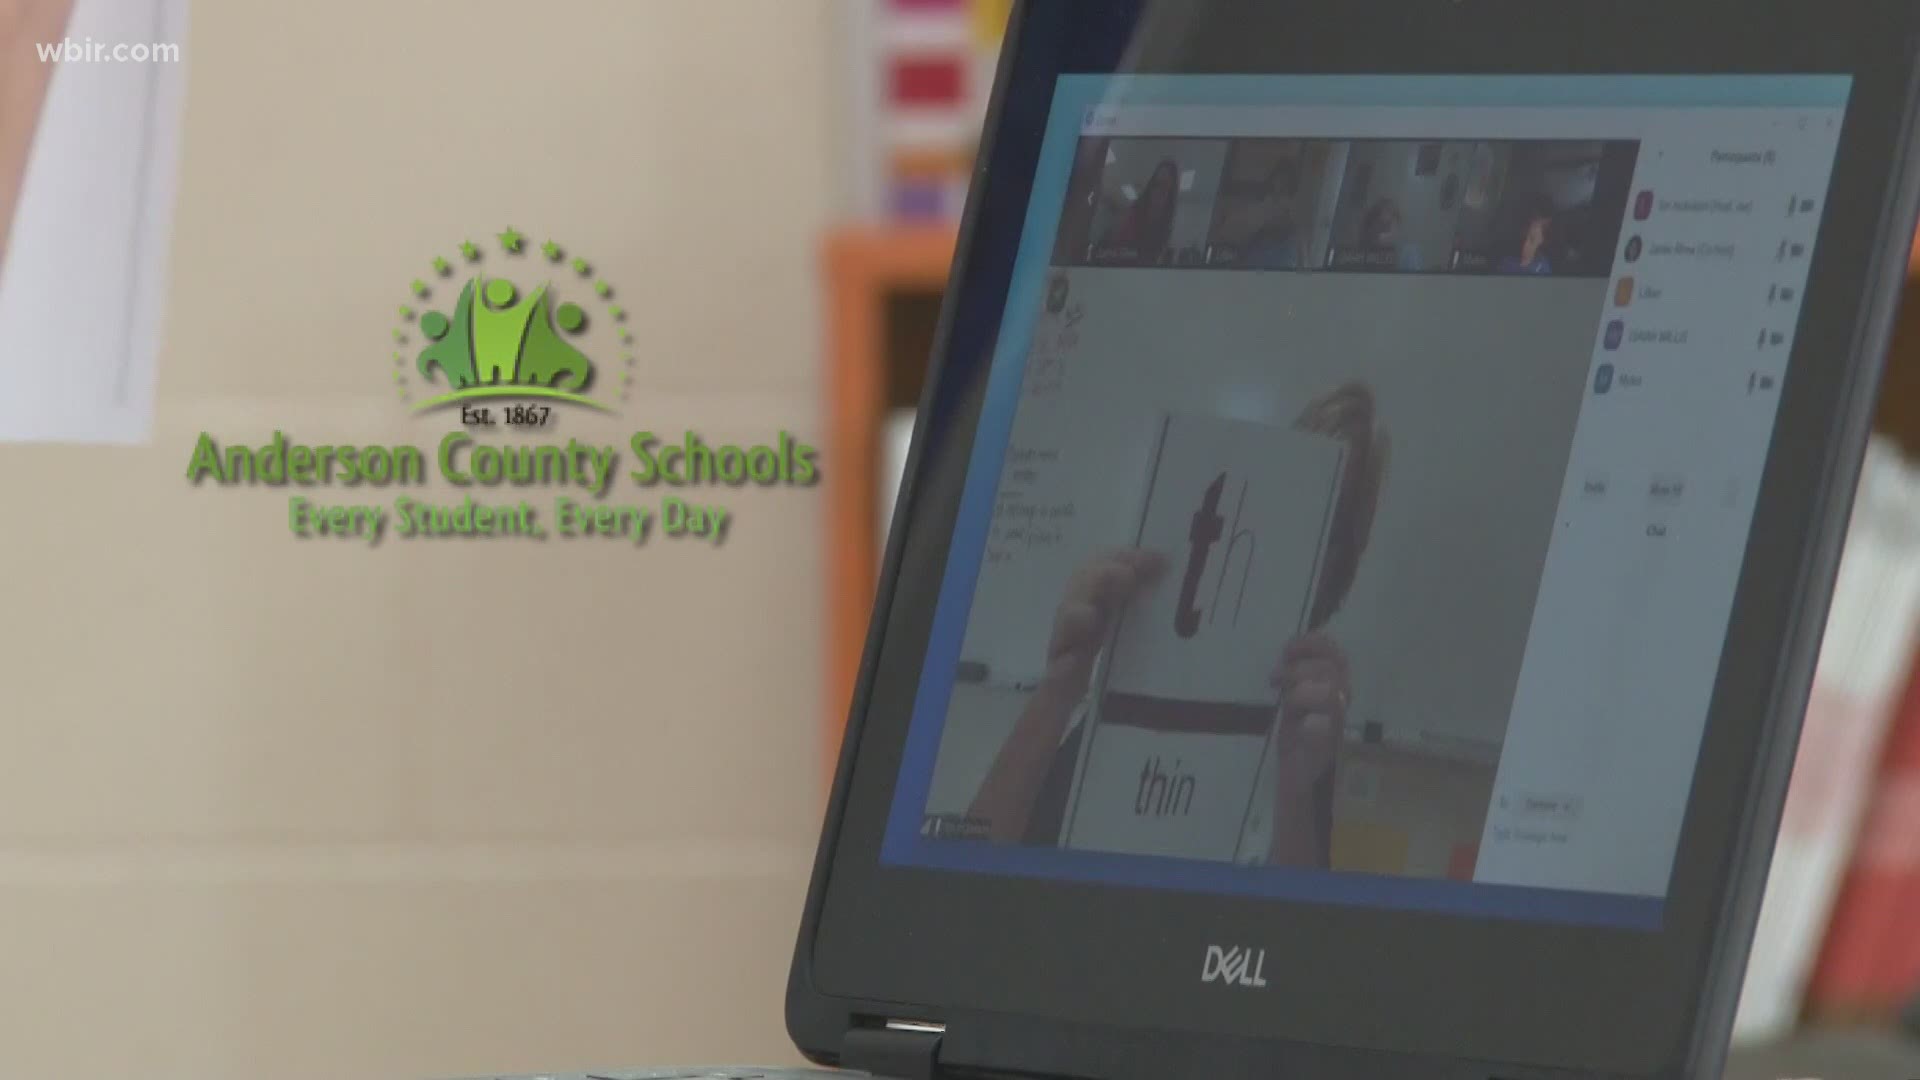 Snow days are less important these days with school systems able to take classes virtually. But they're not totally obsolete. Some kids can't do distance learning.